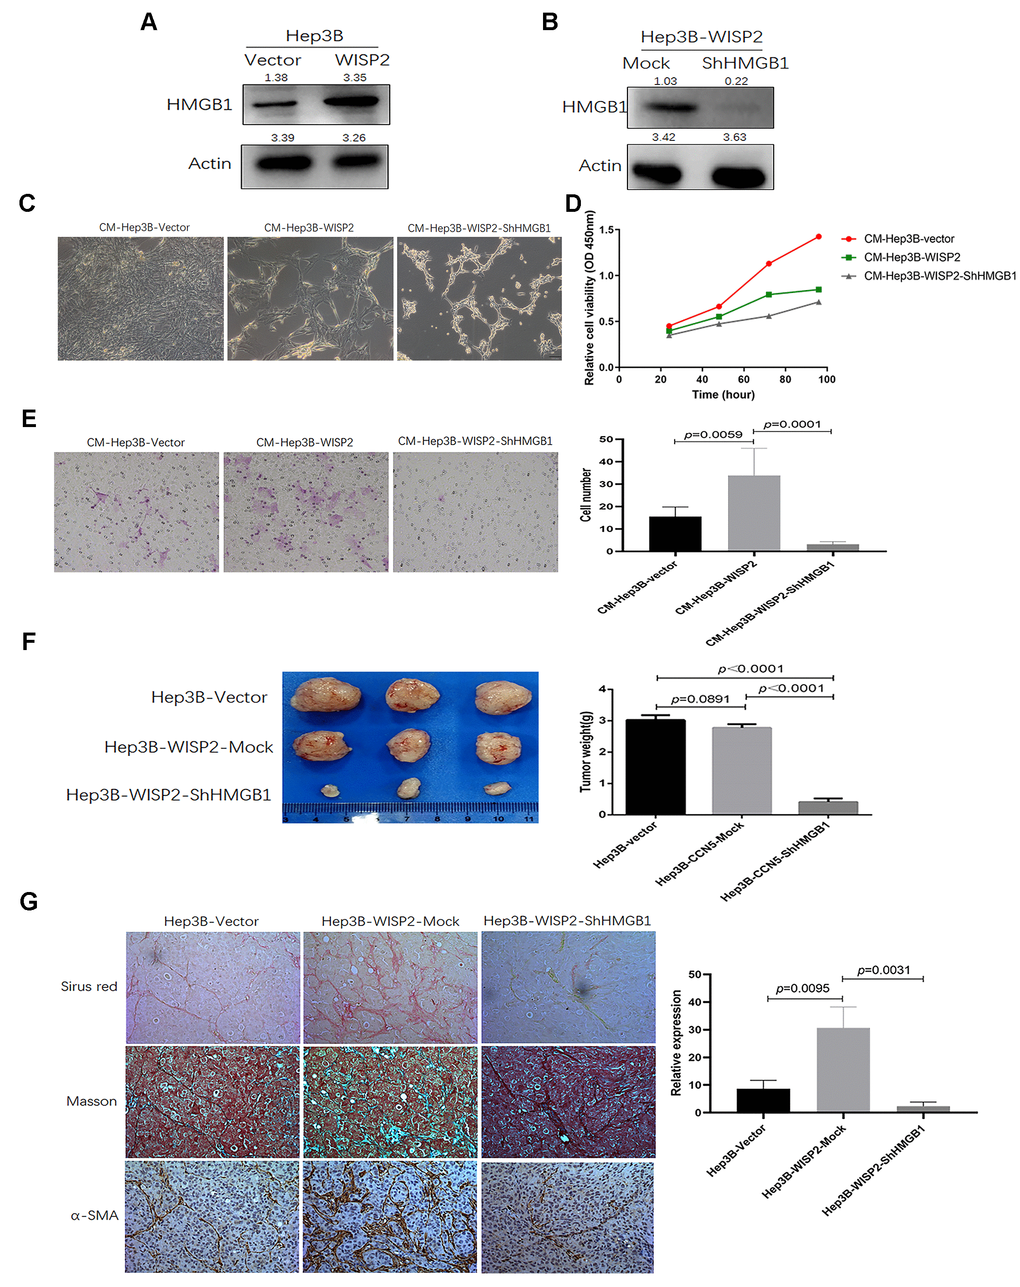 The infiltration of fibroblast cells into HCC tissues is related to HMGB1 after overexpression of WISP2. (A) HMGB1 was significantly upregulated after overexpression of WISP2 at the protein level using immunoblotting in HCC. (B) Immunoblotting was performed to determine the downregulated expression of HMGB1 in Hep3B-WISP2-shHMGB1. (C, D) Hepatic stellate LX2 cells treated with CM from Hep3B-WISP2 or CM from Hep3B-WISP2-shHMGB1, exhibited inhibited proliferation ability. (E) LX2 cells treated with CM from Hep3B-WISP2 exhibited enhanced migration ability, while exhibited inhibited migration ability after treated with CM from Hep3B-WISP2-shHMGB1. (F) Subcutaneous tumours in nude mice were induced via inoculation with Hep3B-Vector, Hep3B-WISP2-Mock, and Hep3B-WISP2-ShHMGB1 HCC cells, and the weights of tumours from Hep3B-WISP2-ShHMGB1 cells were significantly decreased. (G) Tumours generated from the Hep3B-WISP2-ShHMGB1 cells exhibited significantly decreased α-SMA expression and fibro-collagen deposition.